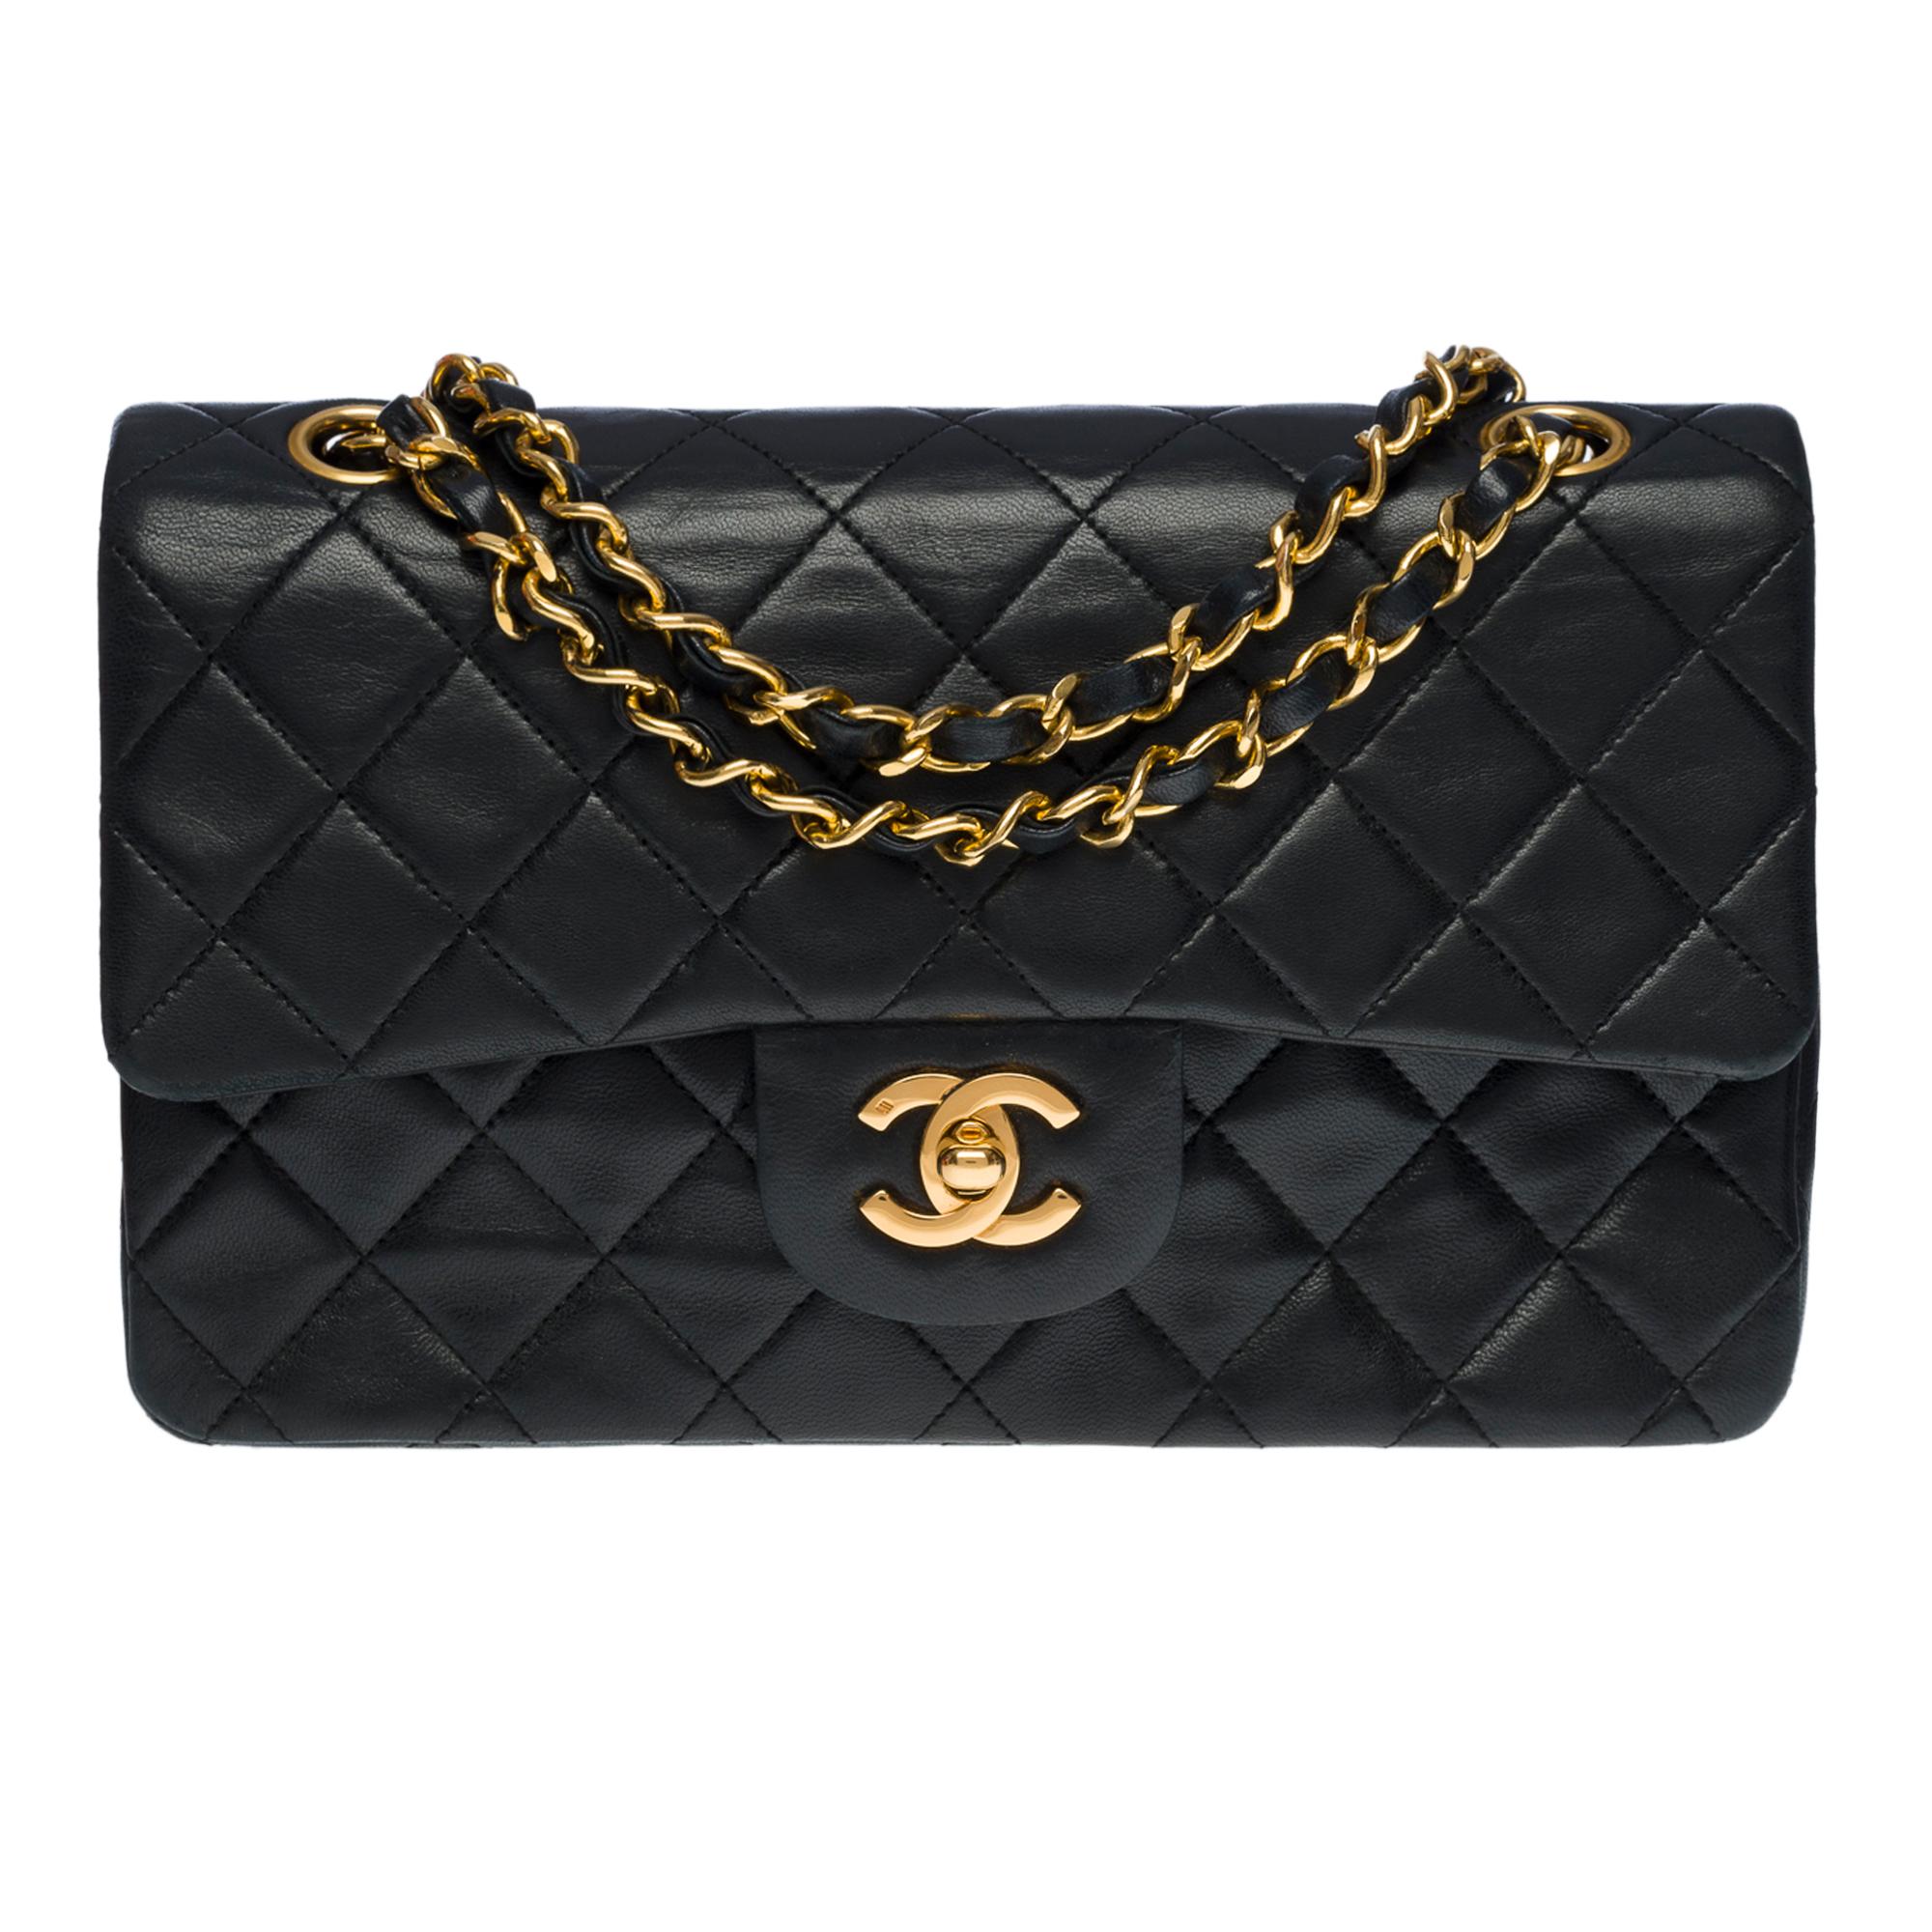 The coveted Chanel Timeless 23 cm double flap shoulder bag in black quilted lambskin leather, gold-tone metal hardware, gold-tone metal chain interlaced with black leather allowing a shoulder and shoulder strap
Backpack pocket
Flap closure, gold CC